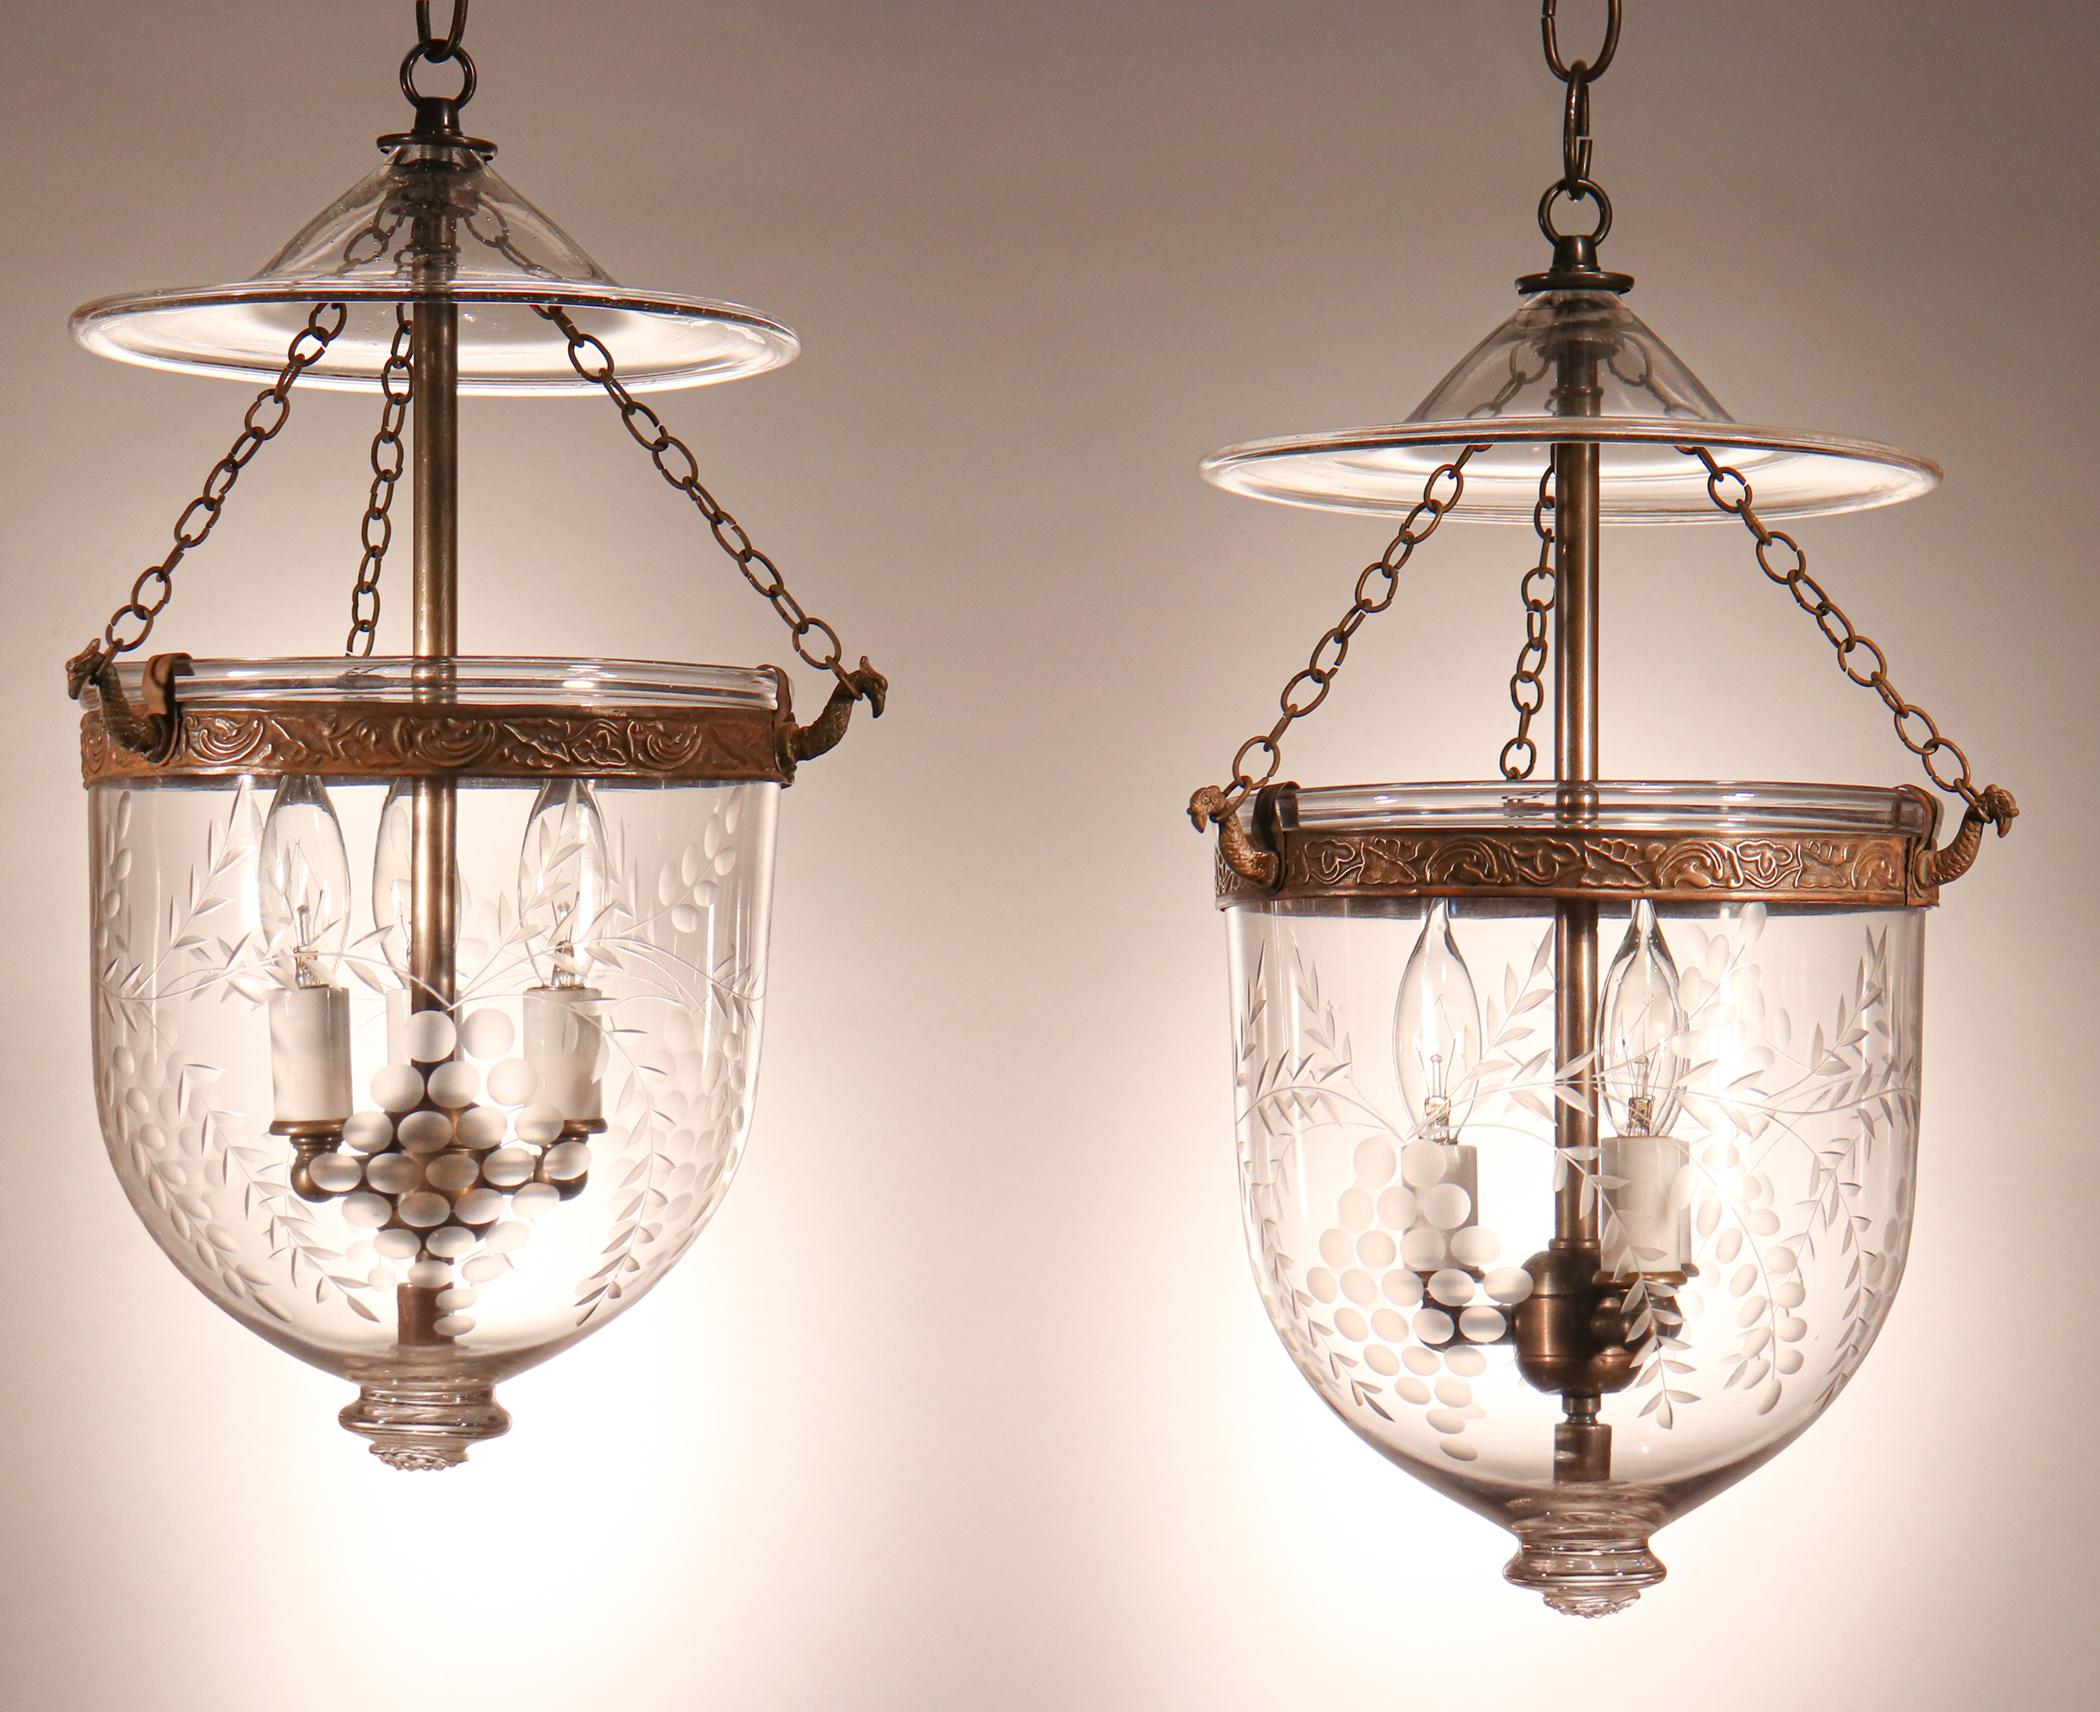 A lovely and well-matched pair of English hand blown glass bell jar lanterns with an etched grape motif. The embossed brass bands, which have a botanical design, have been replaced at some point to ensure that the pendants are secure when hanging.